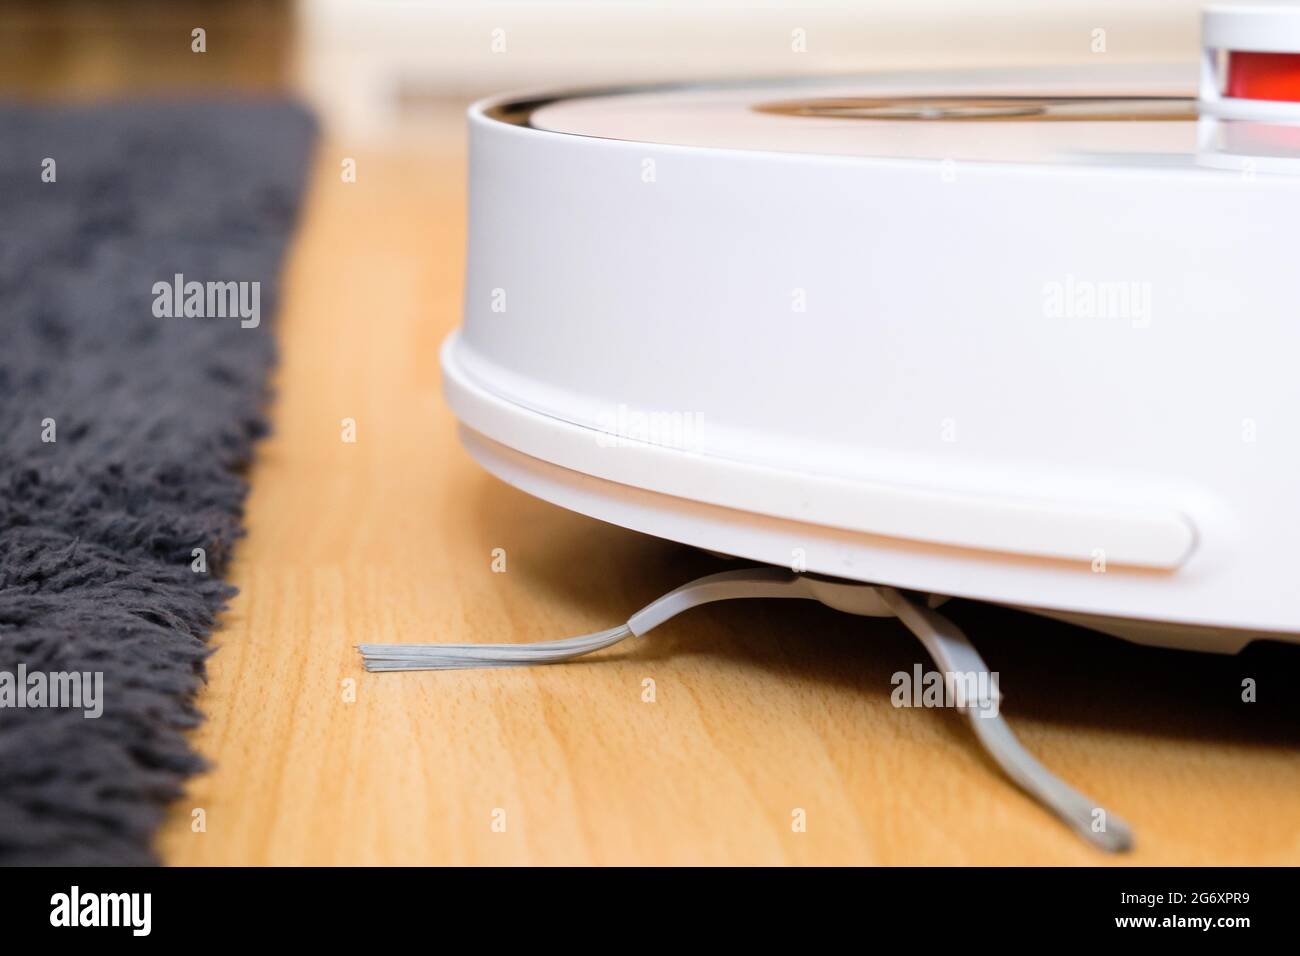 Robot vacuum cleaner performs cleaning of the wooden floor near the carpet. Housekeeping smart technology Stock Photo